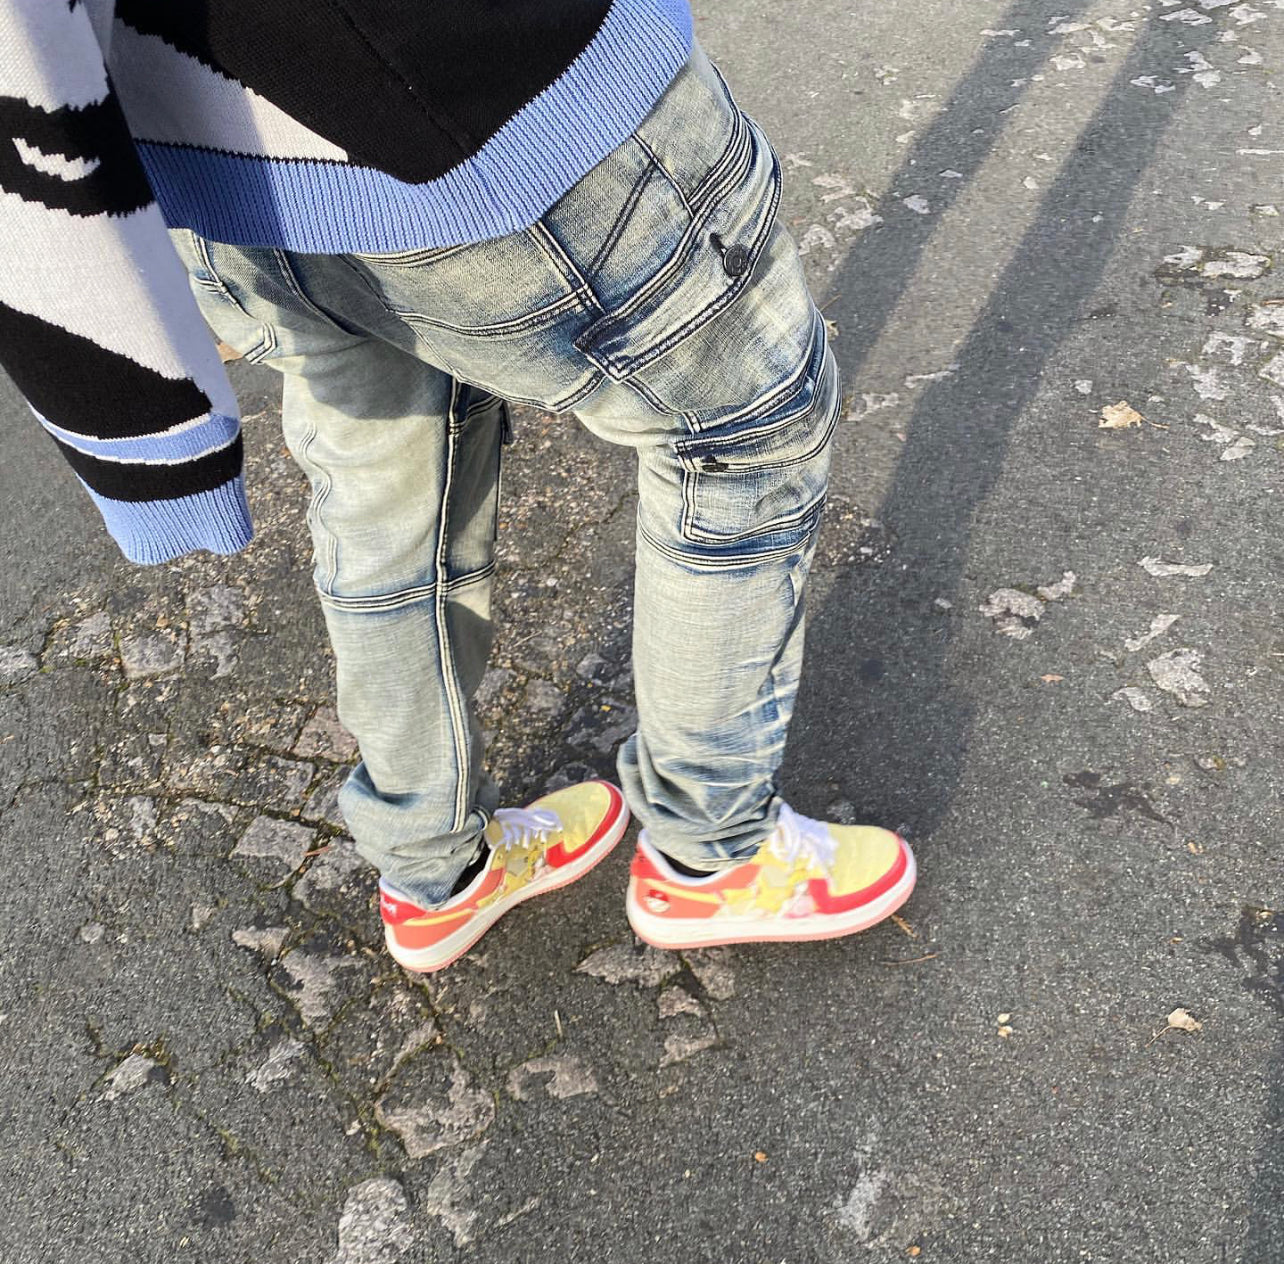 Lil Monkey (@youv_dee) wears the Jose Wong Bapesta "Yosansta" sneakers with the Kyle Blue cargo stacked jeans